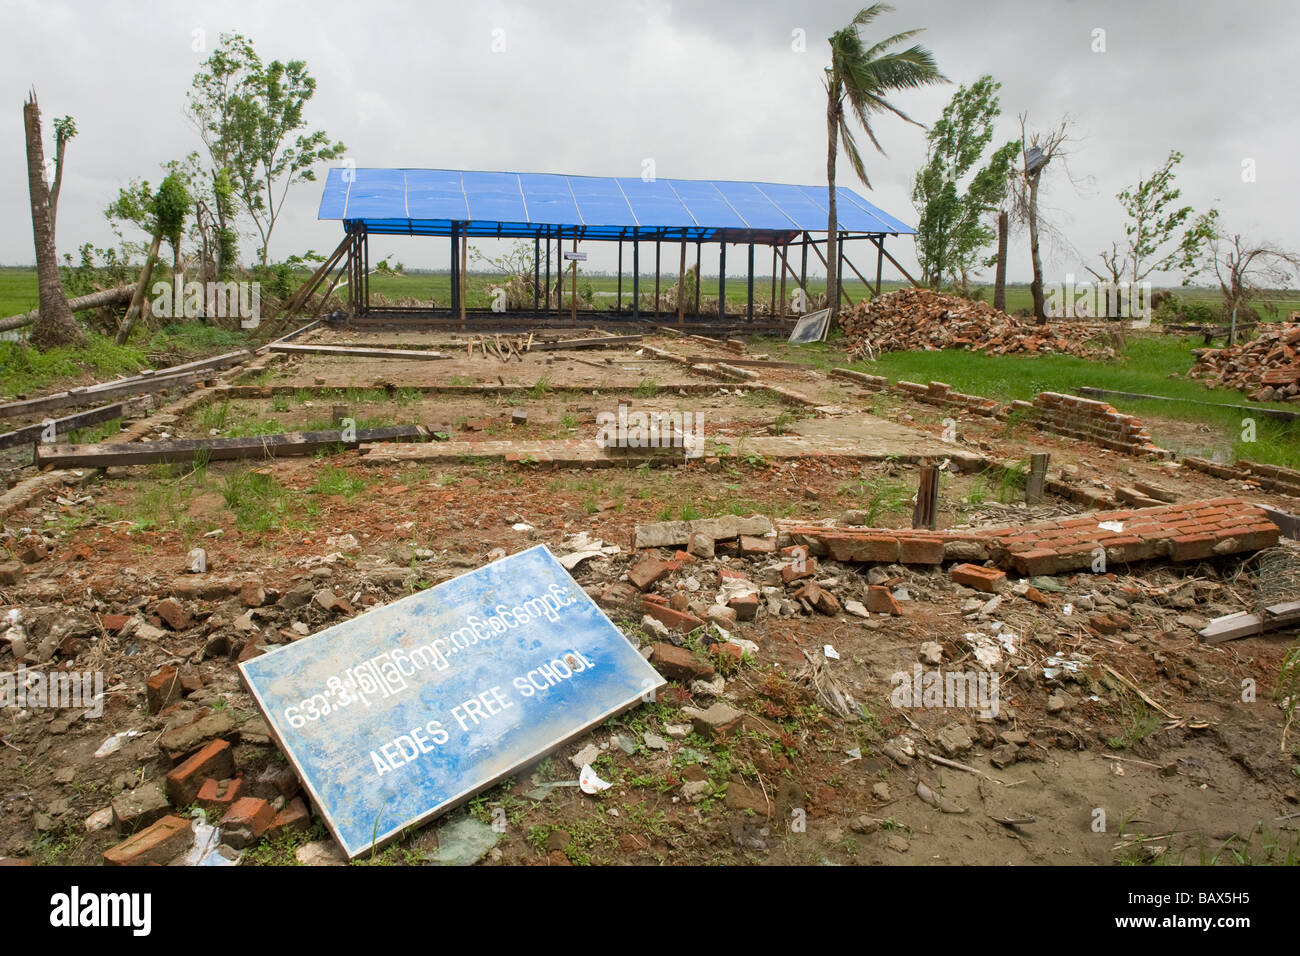 A destroyed school in Bogale after cyclone Nargis struck Myanmar between the 2nd and 3rd of May 2008 and destroyed large parts o Stock Photo